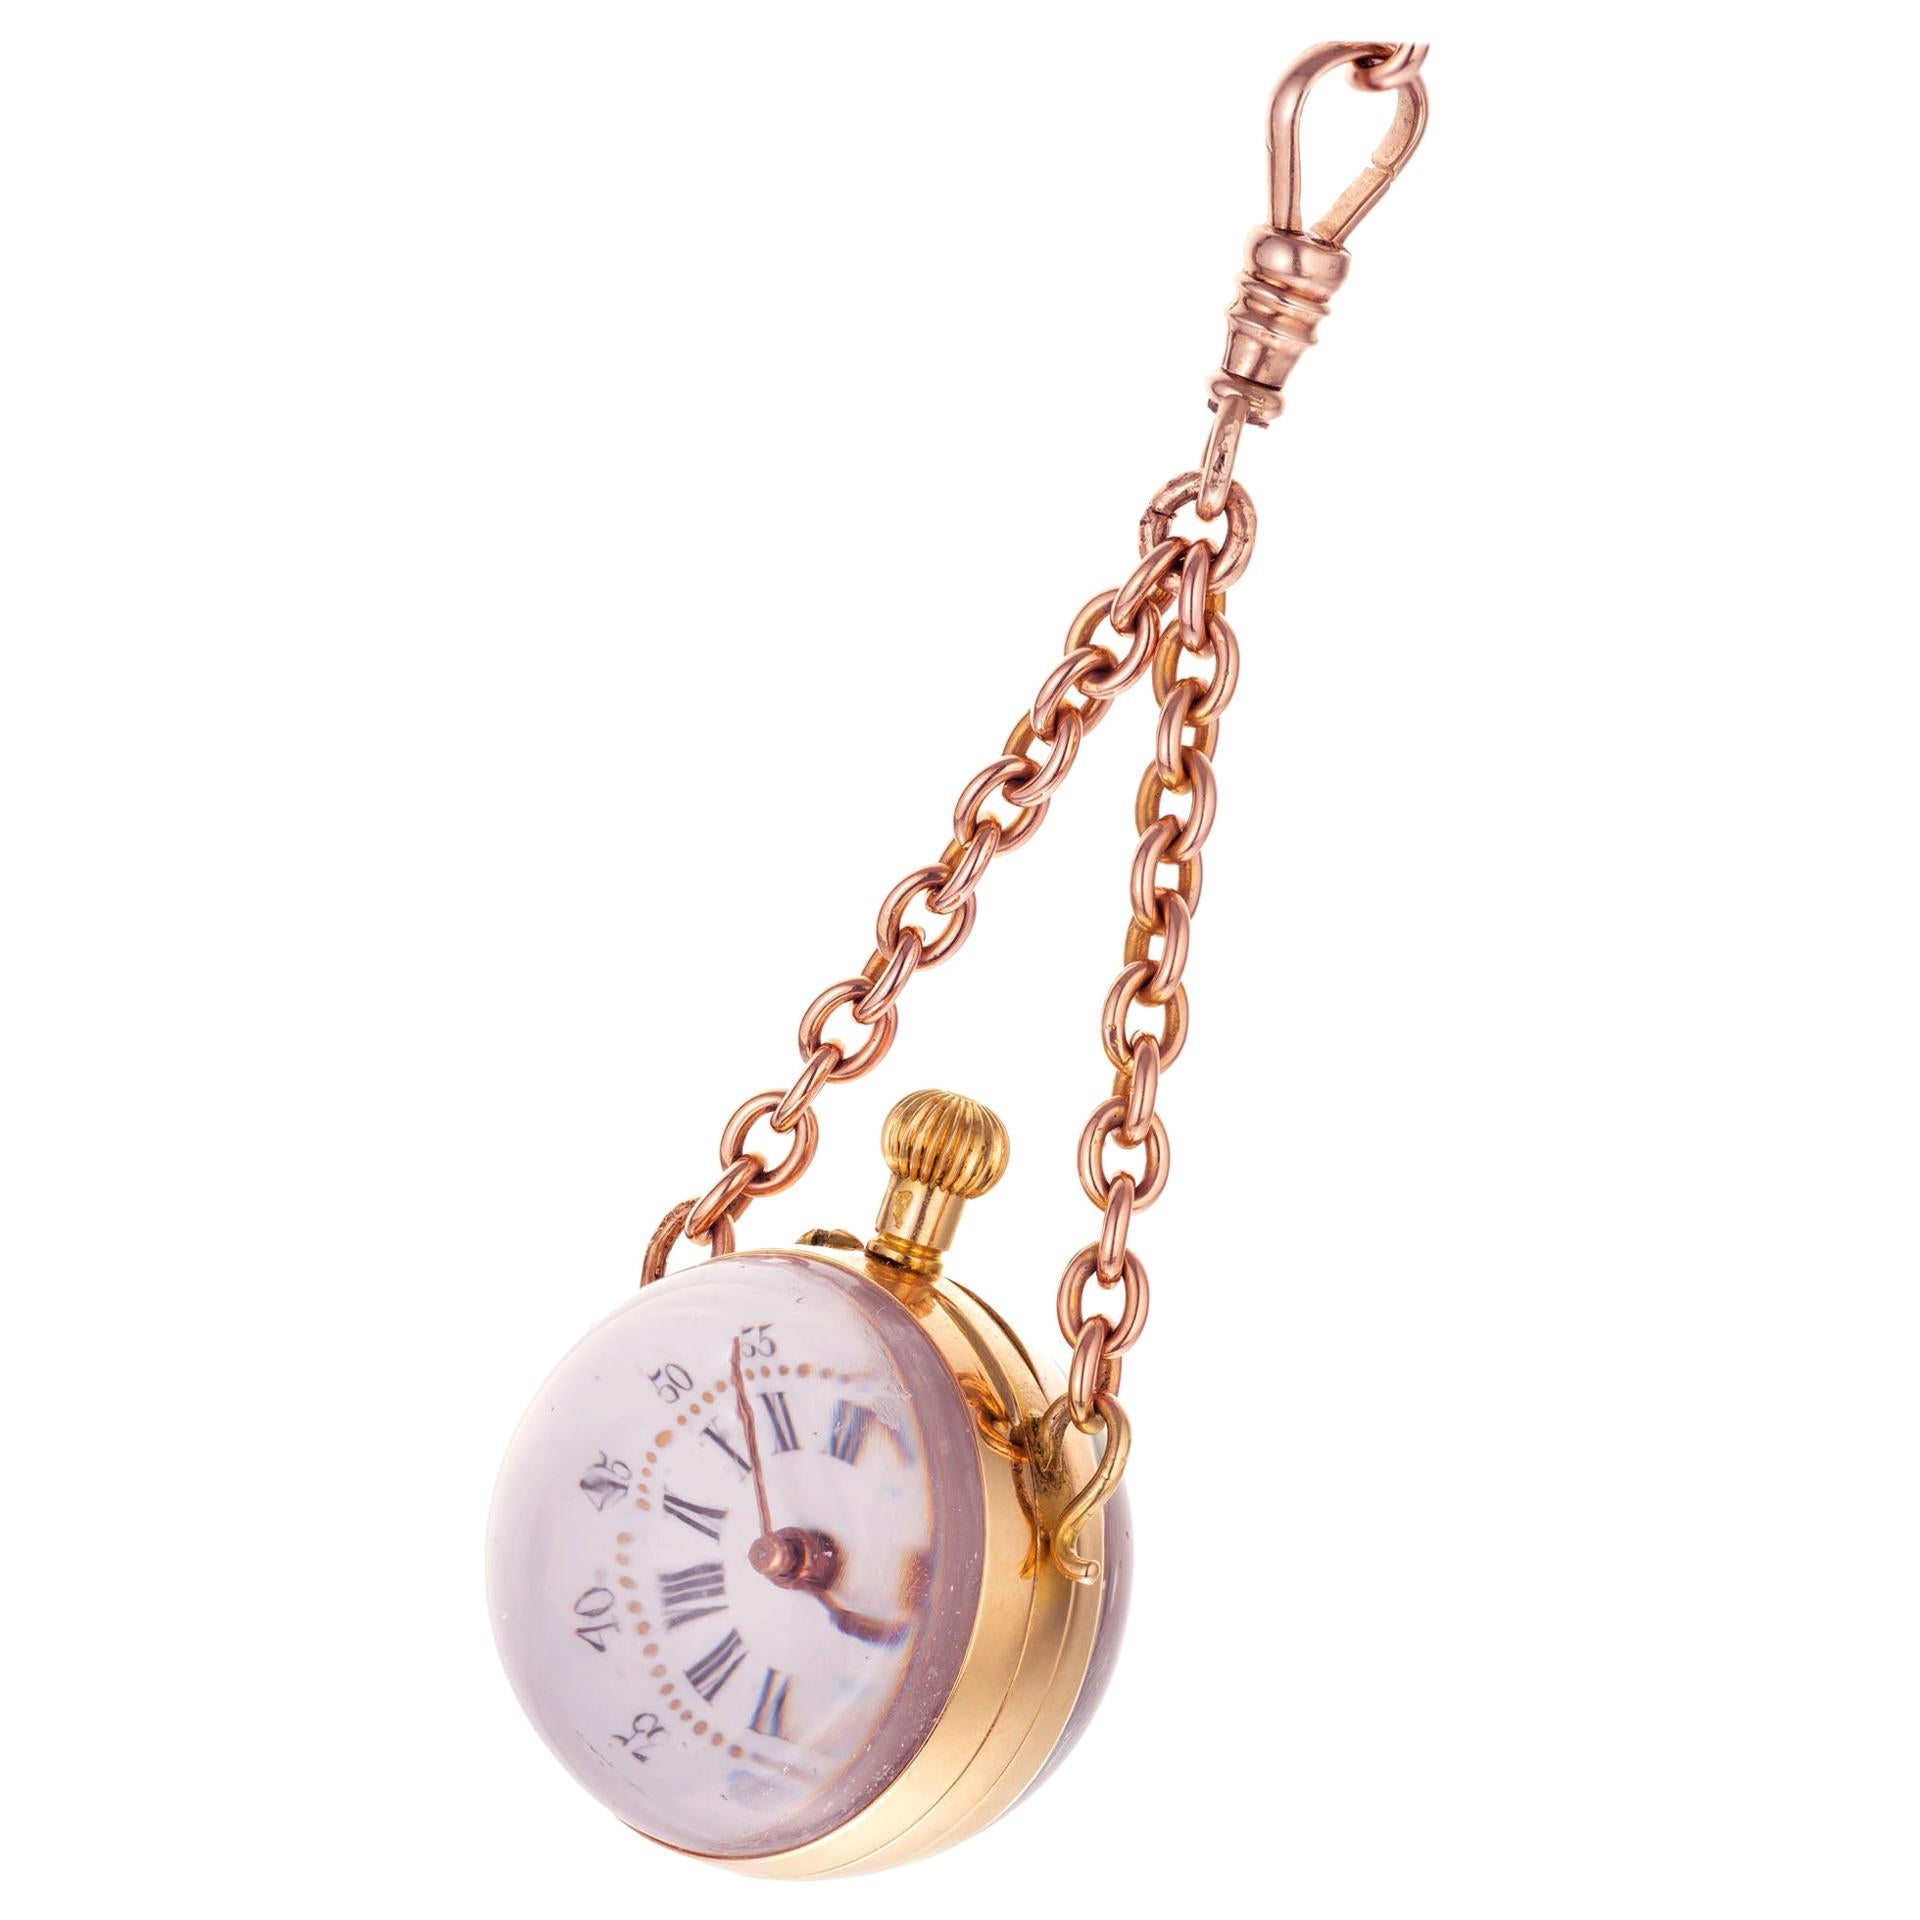 Rose Gold Crystal Ball Pocket Watch Pendant Necklace